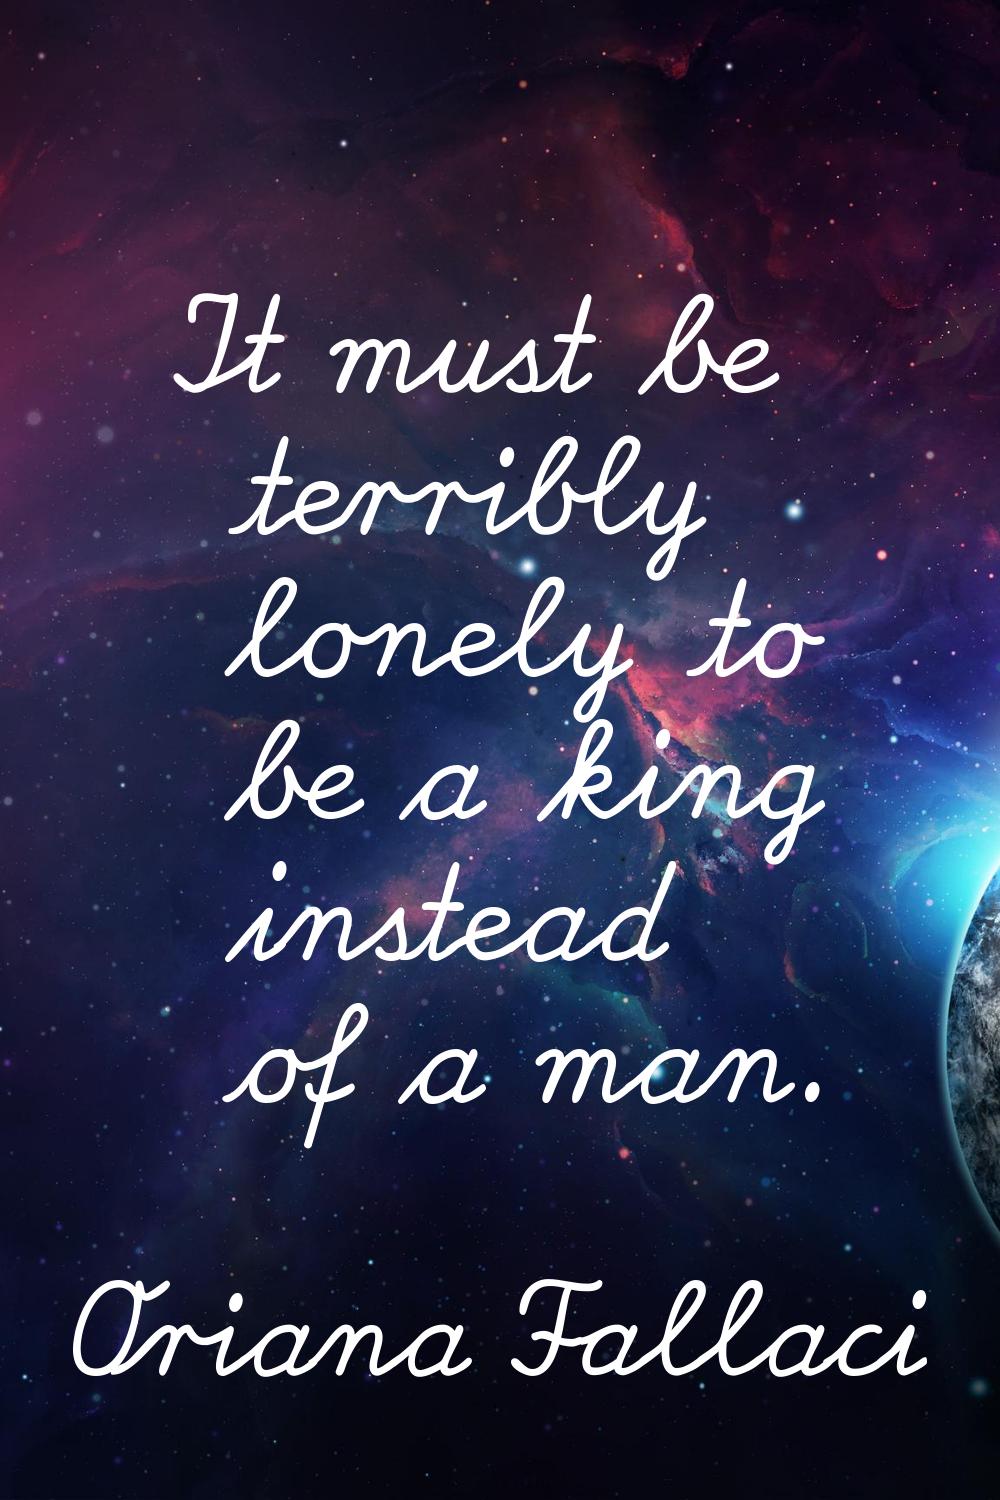 It must be terribly lonely to be a king instead of a man.